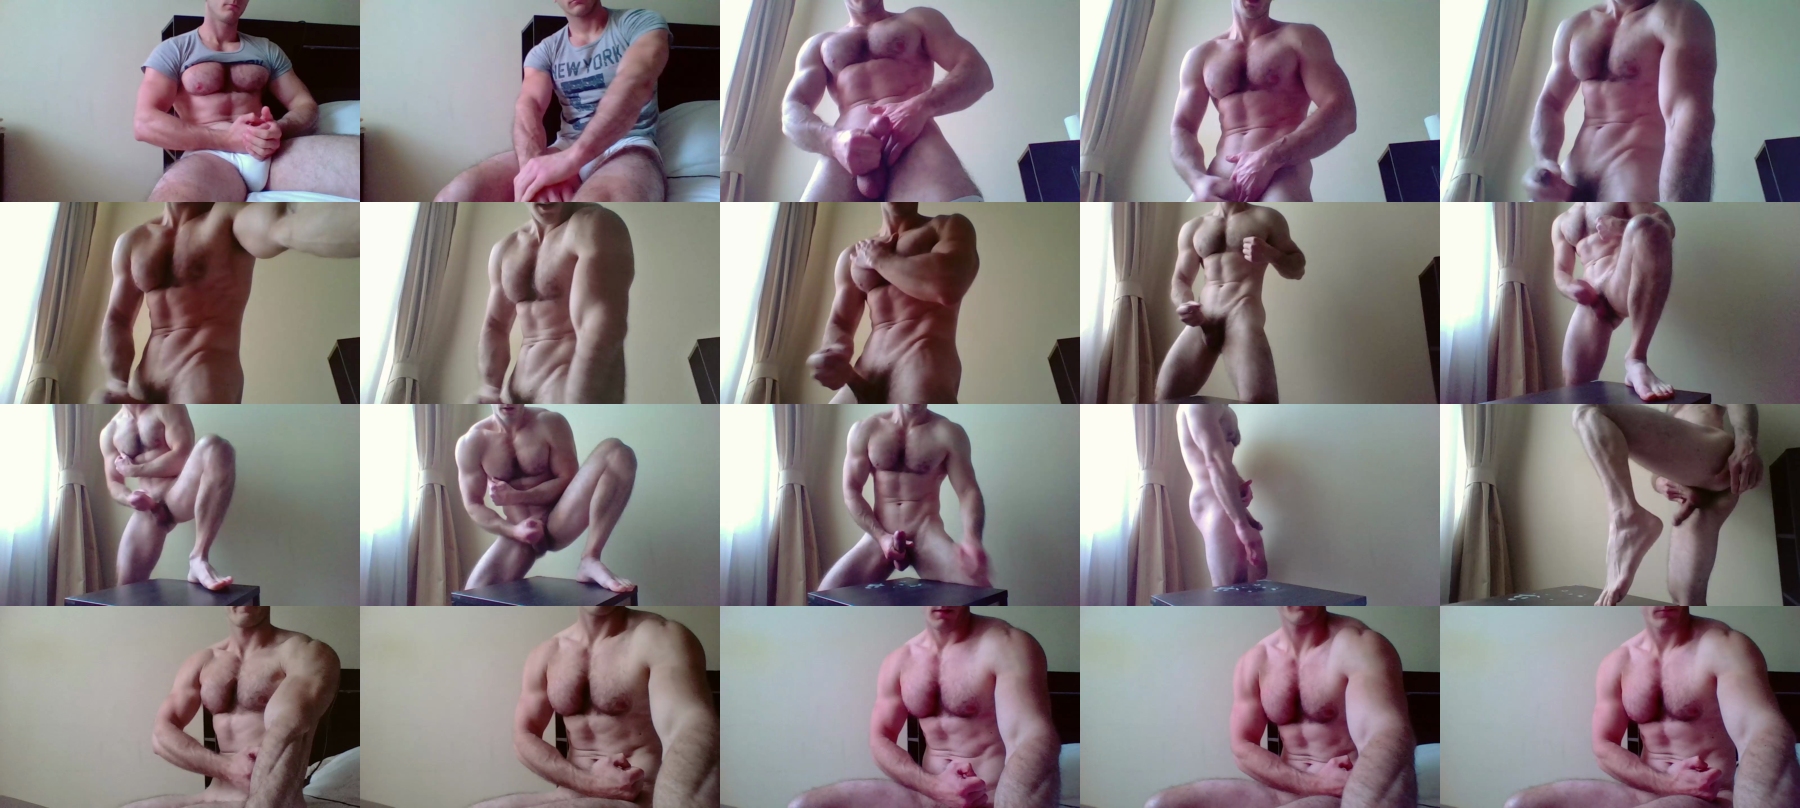 Sportboy2444 Recorded CAM SHOW @ Chaturbate 14-11-2021